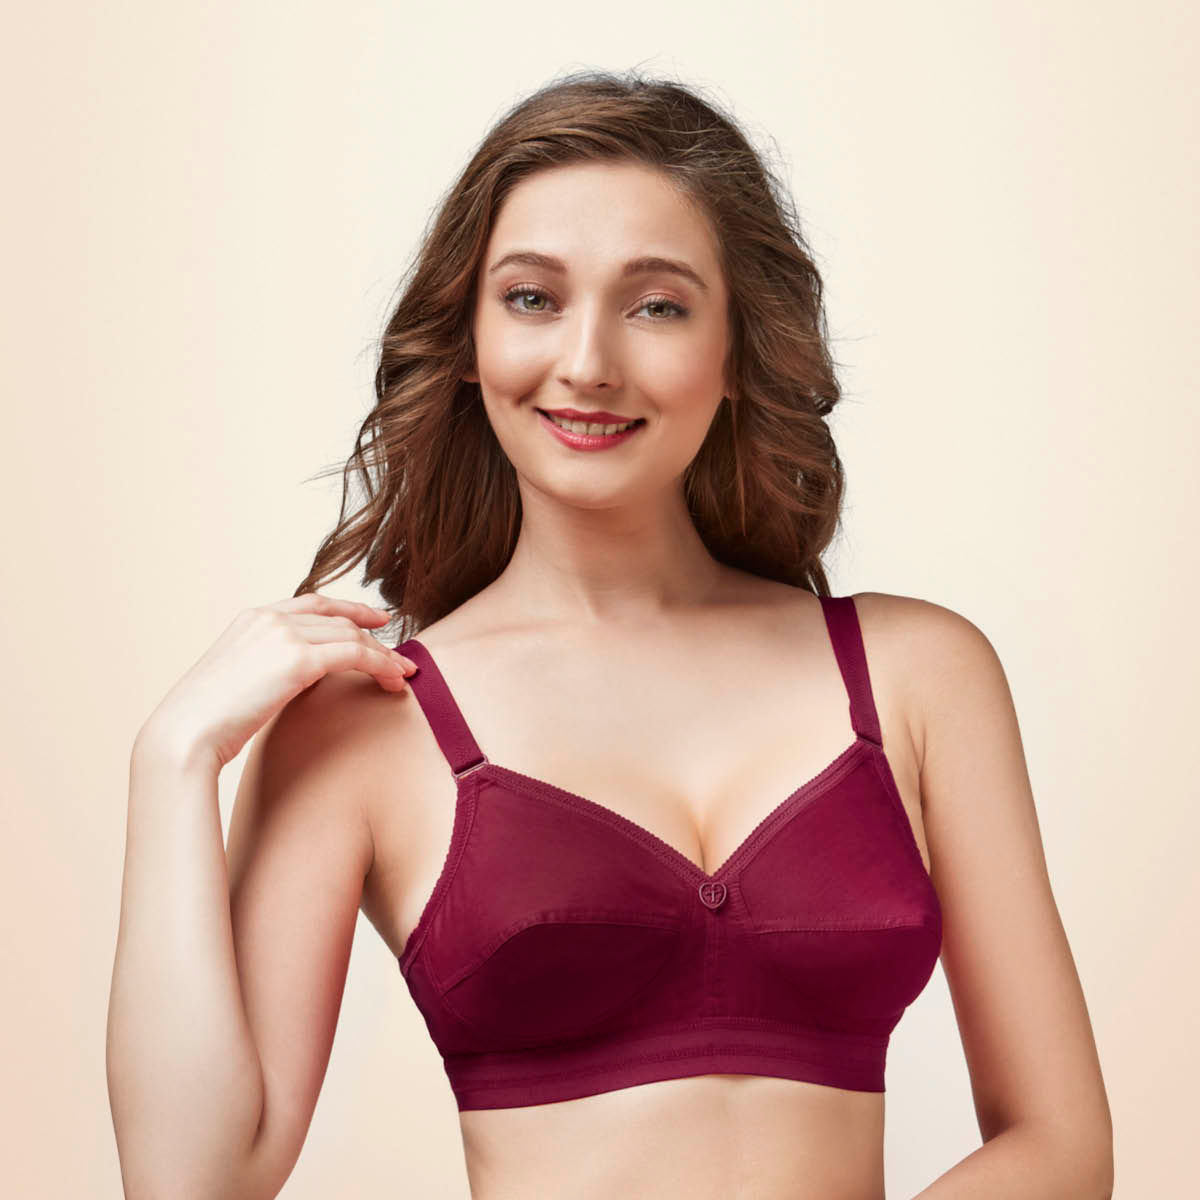 Buy Trylo Namrata Women's Cotton Non-wired Soft Full Cup Bra - Maroon Online